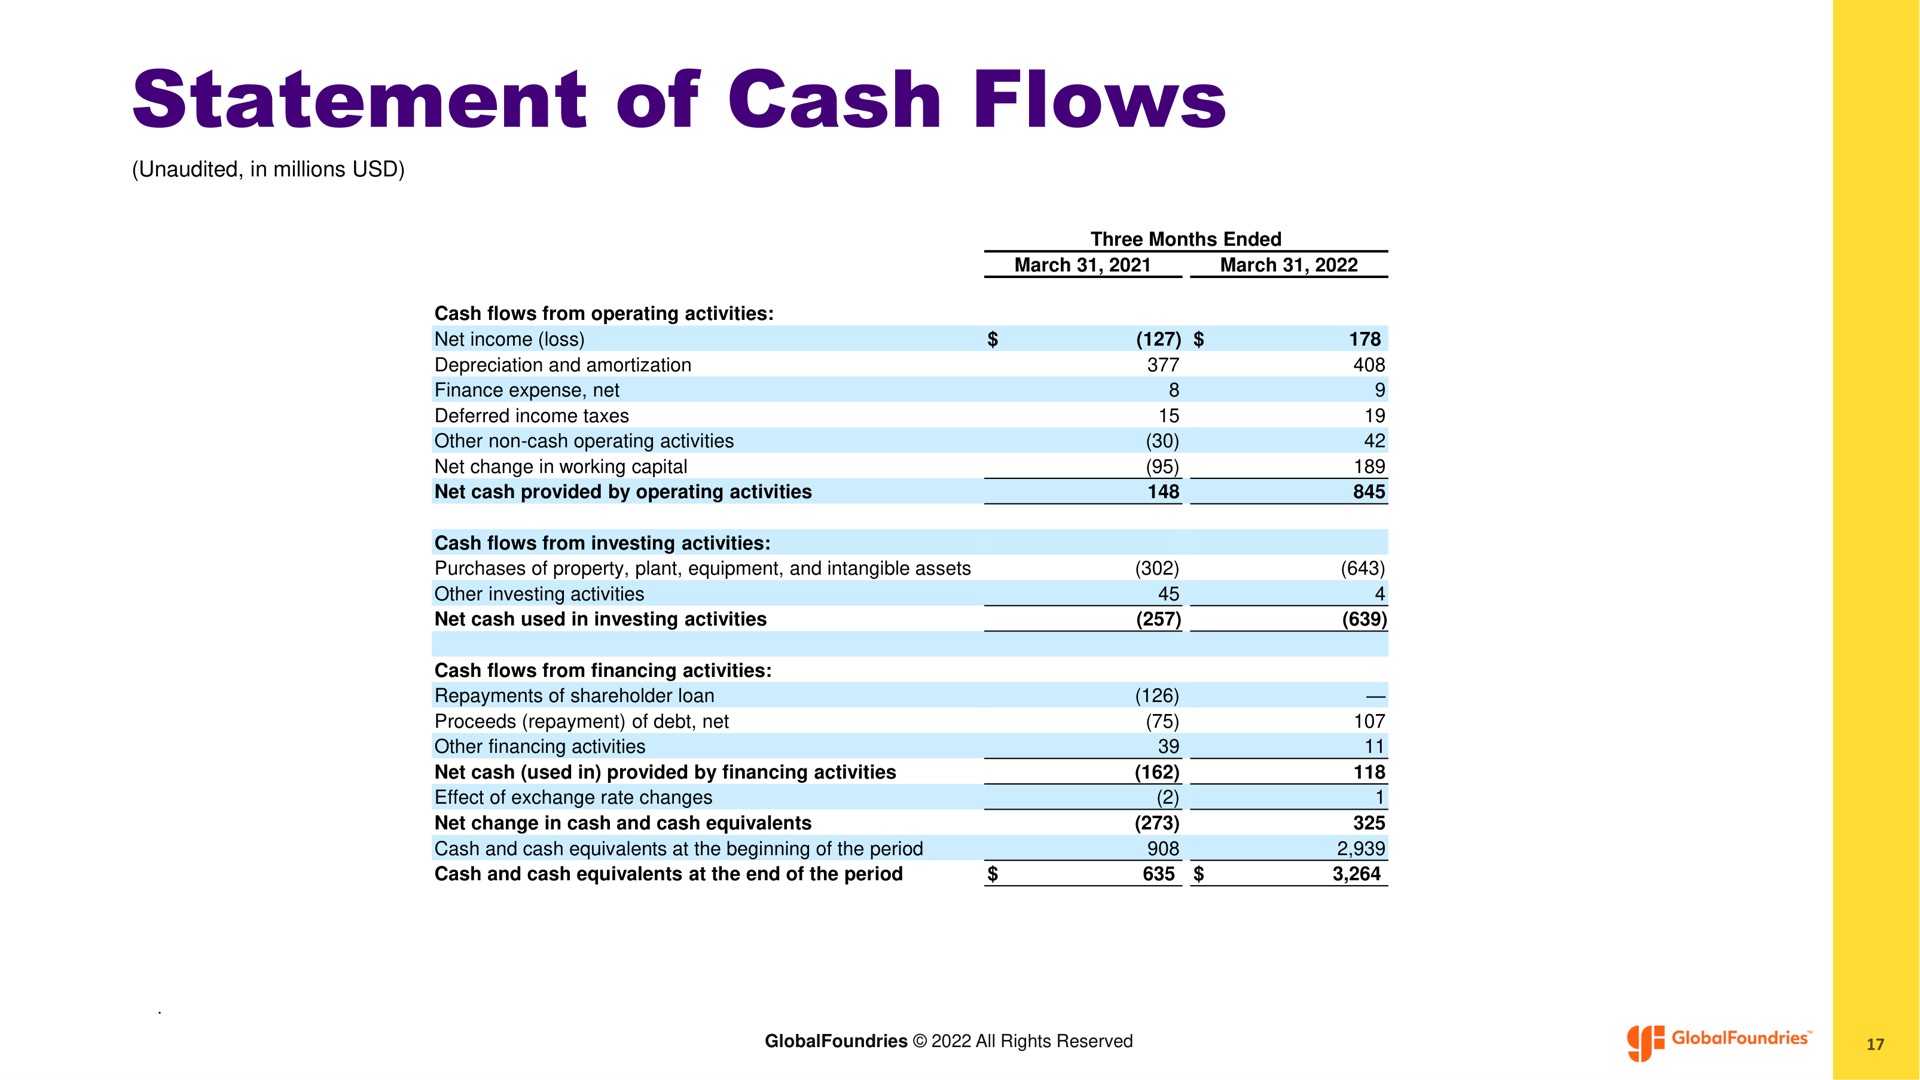 statement of cash flows march | GlobalFoundries